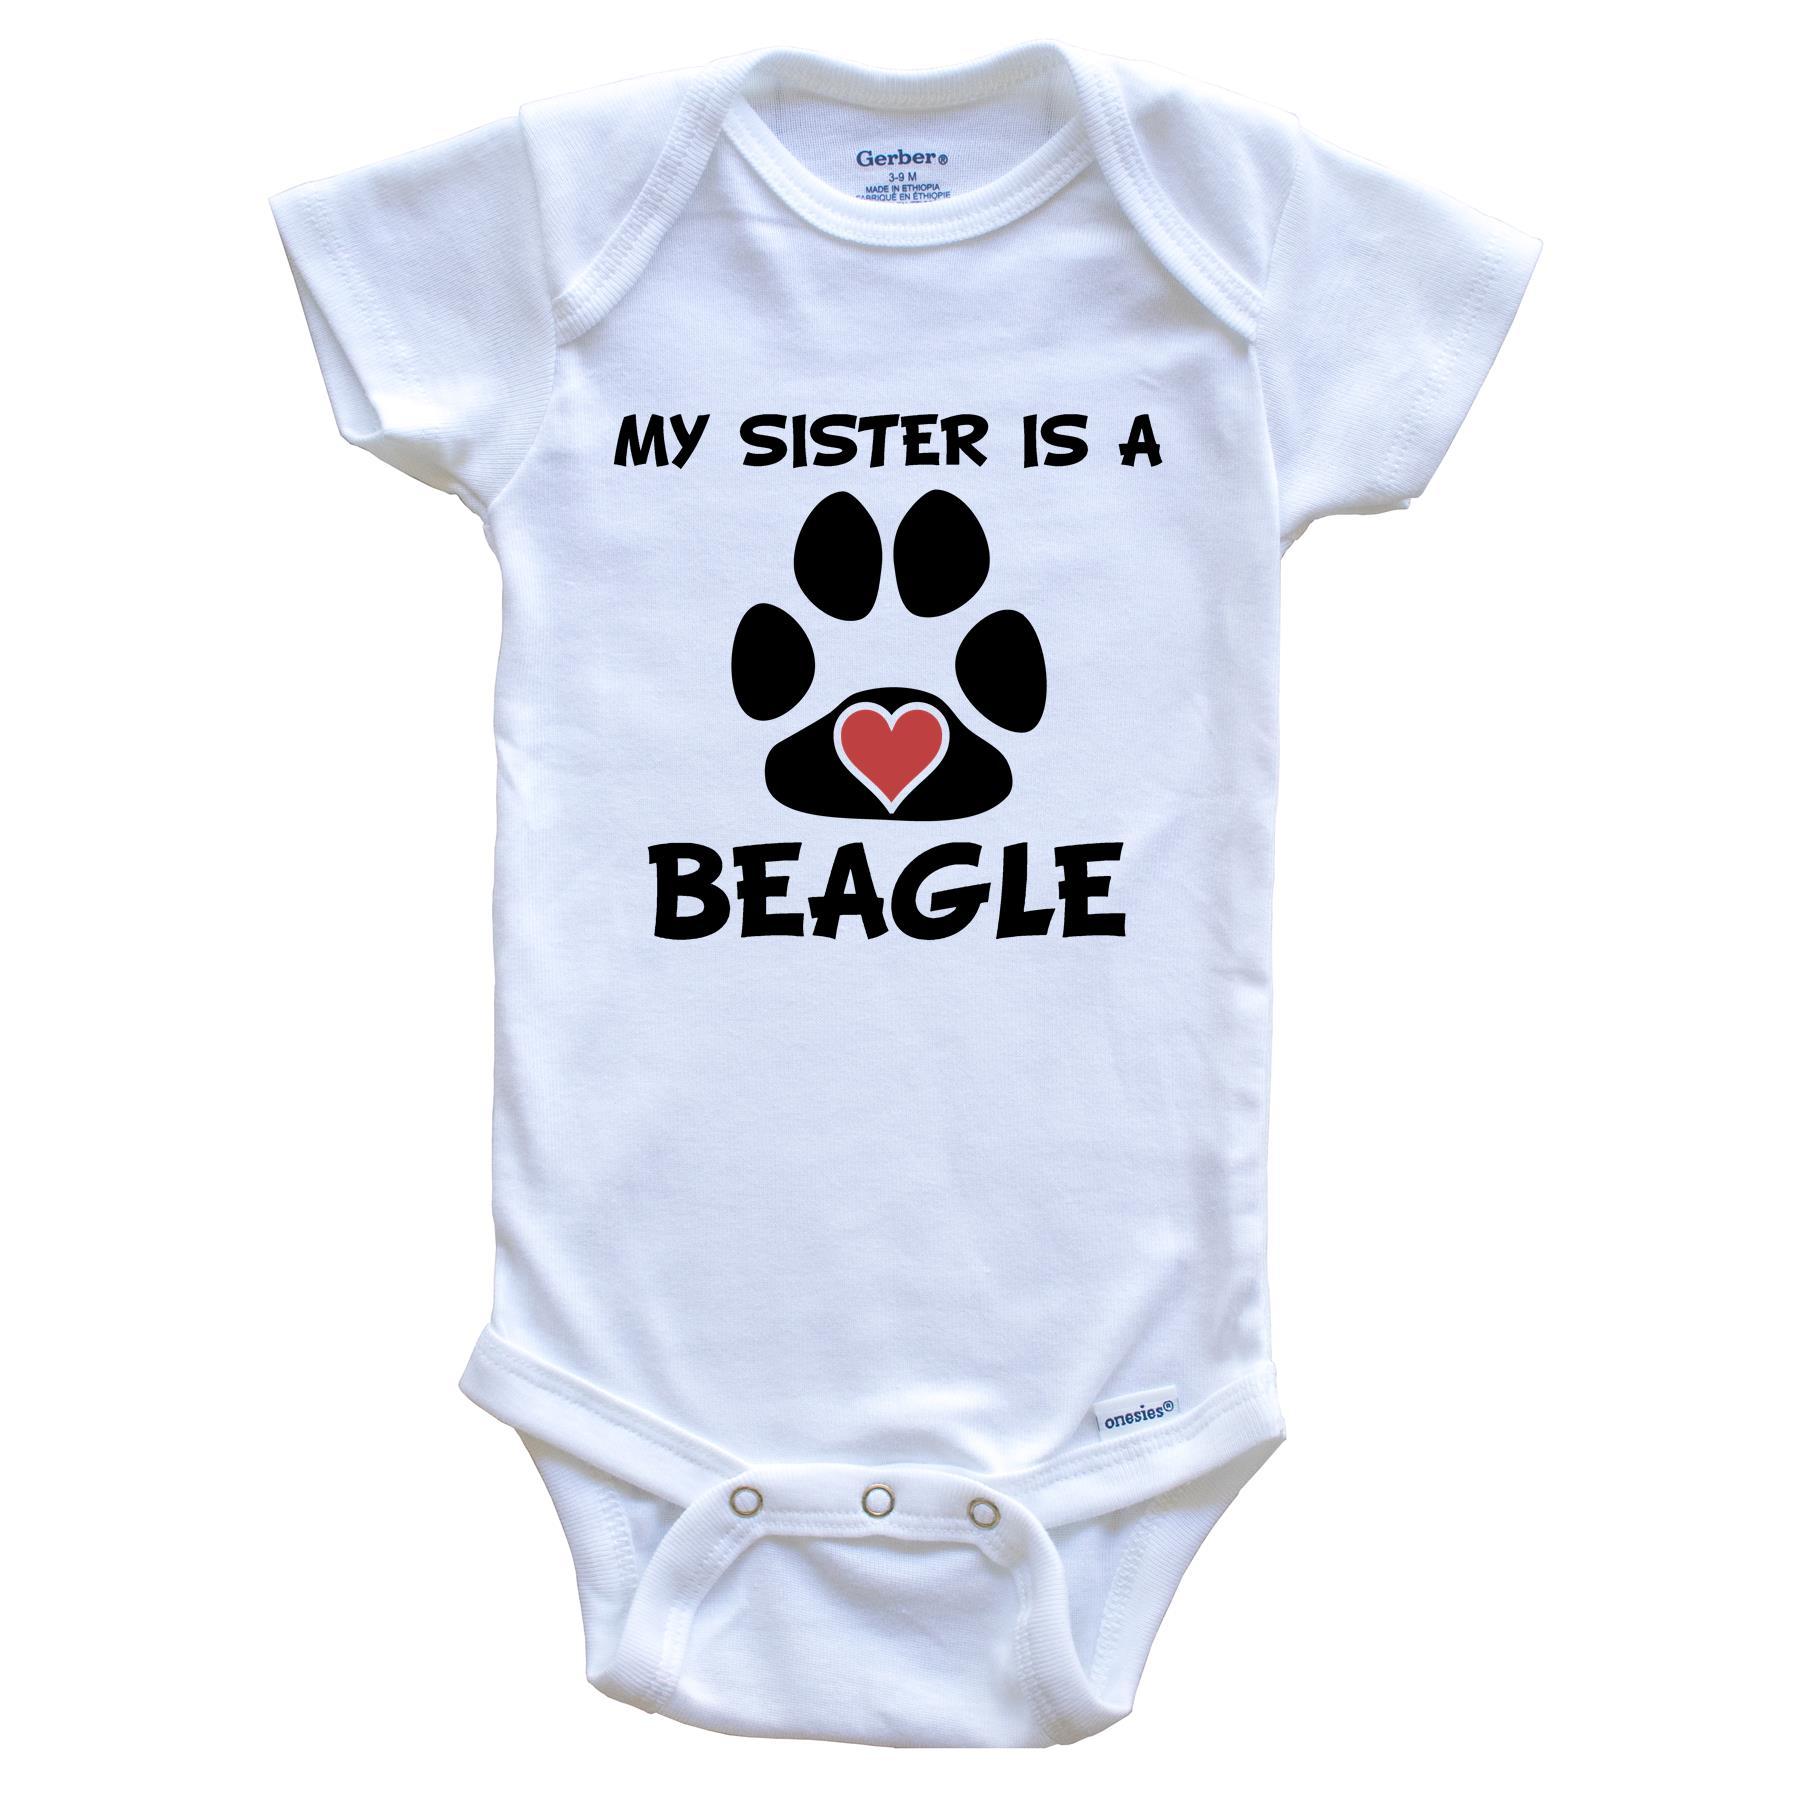 My Sister Is A Beagle Baby Onesie